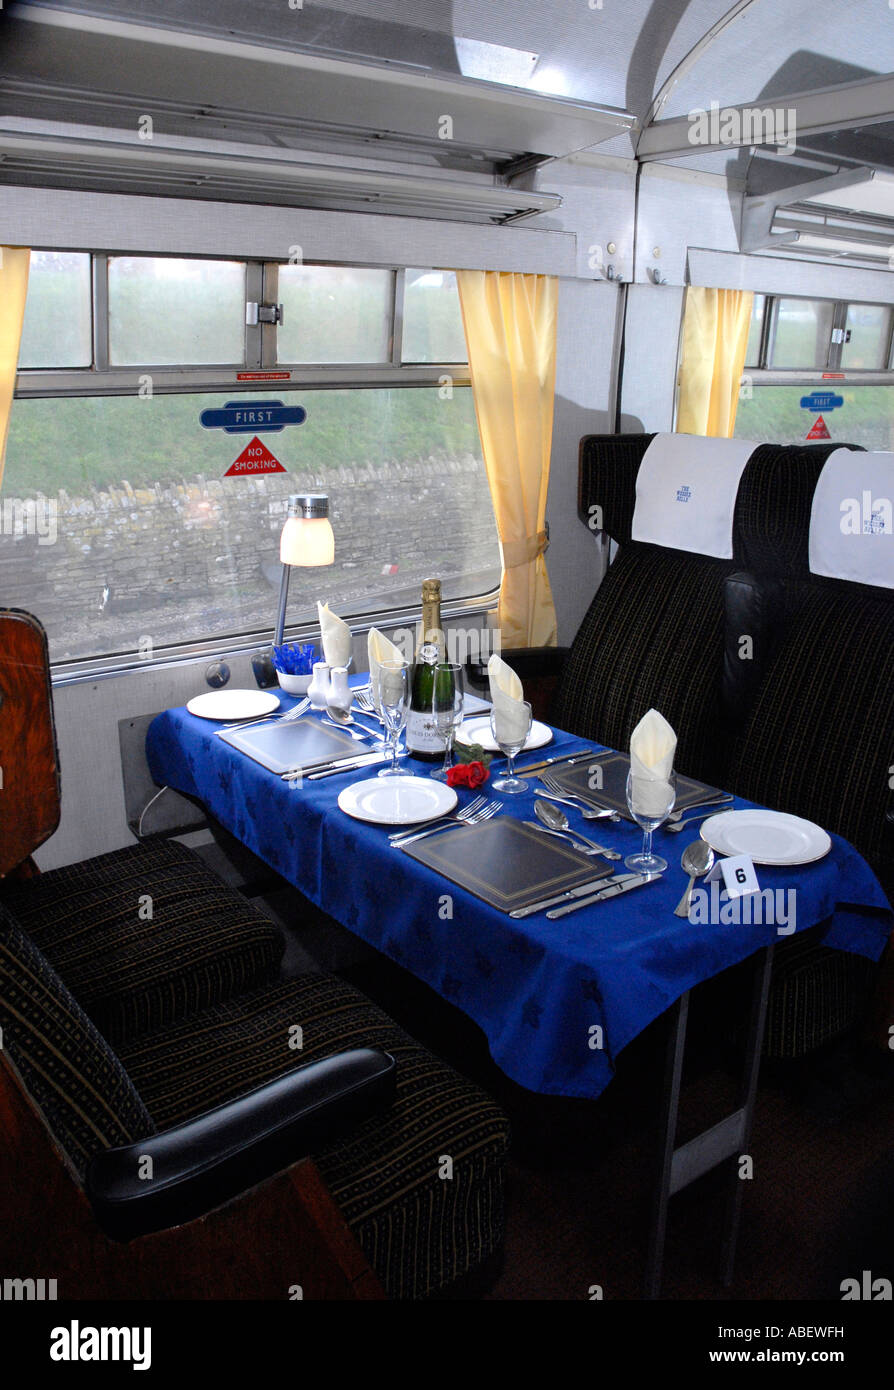 The Wessex Belle dining car used for catering events on the Swanage Railway Dorset, Britain, UK Stock Photo